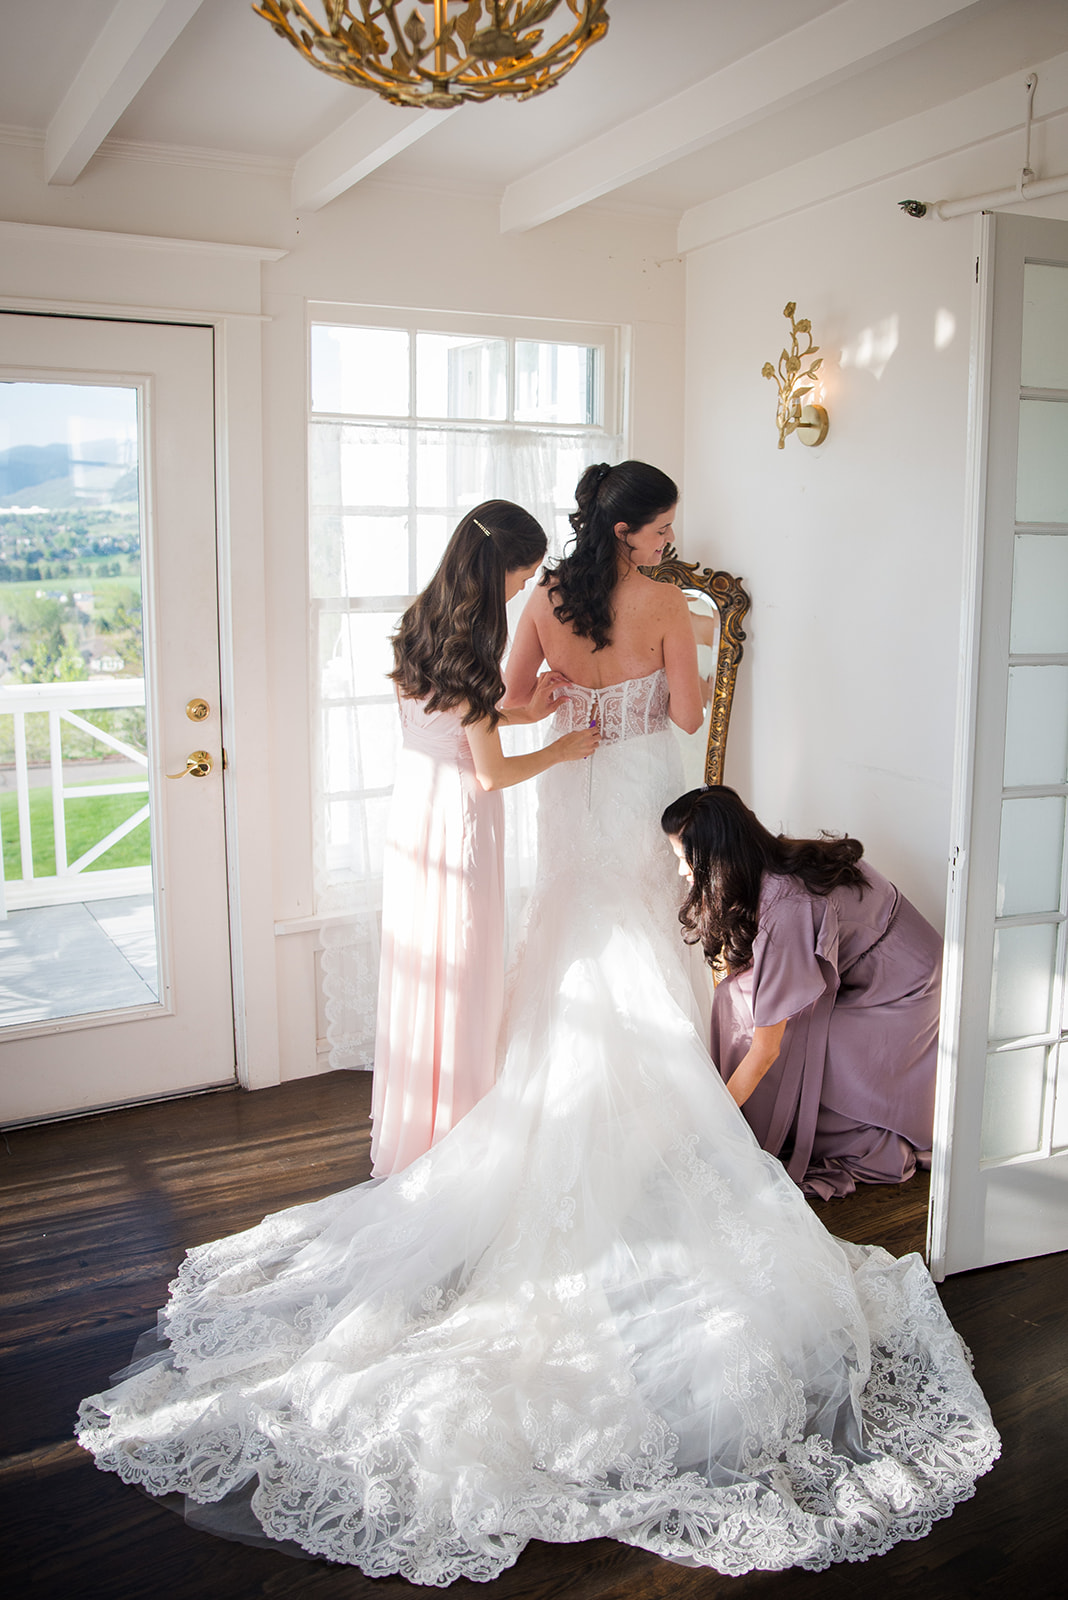 Bride's sister and mother attend to her wedding dress and help her get ready.